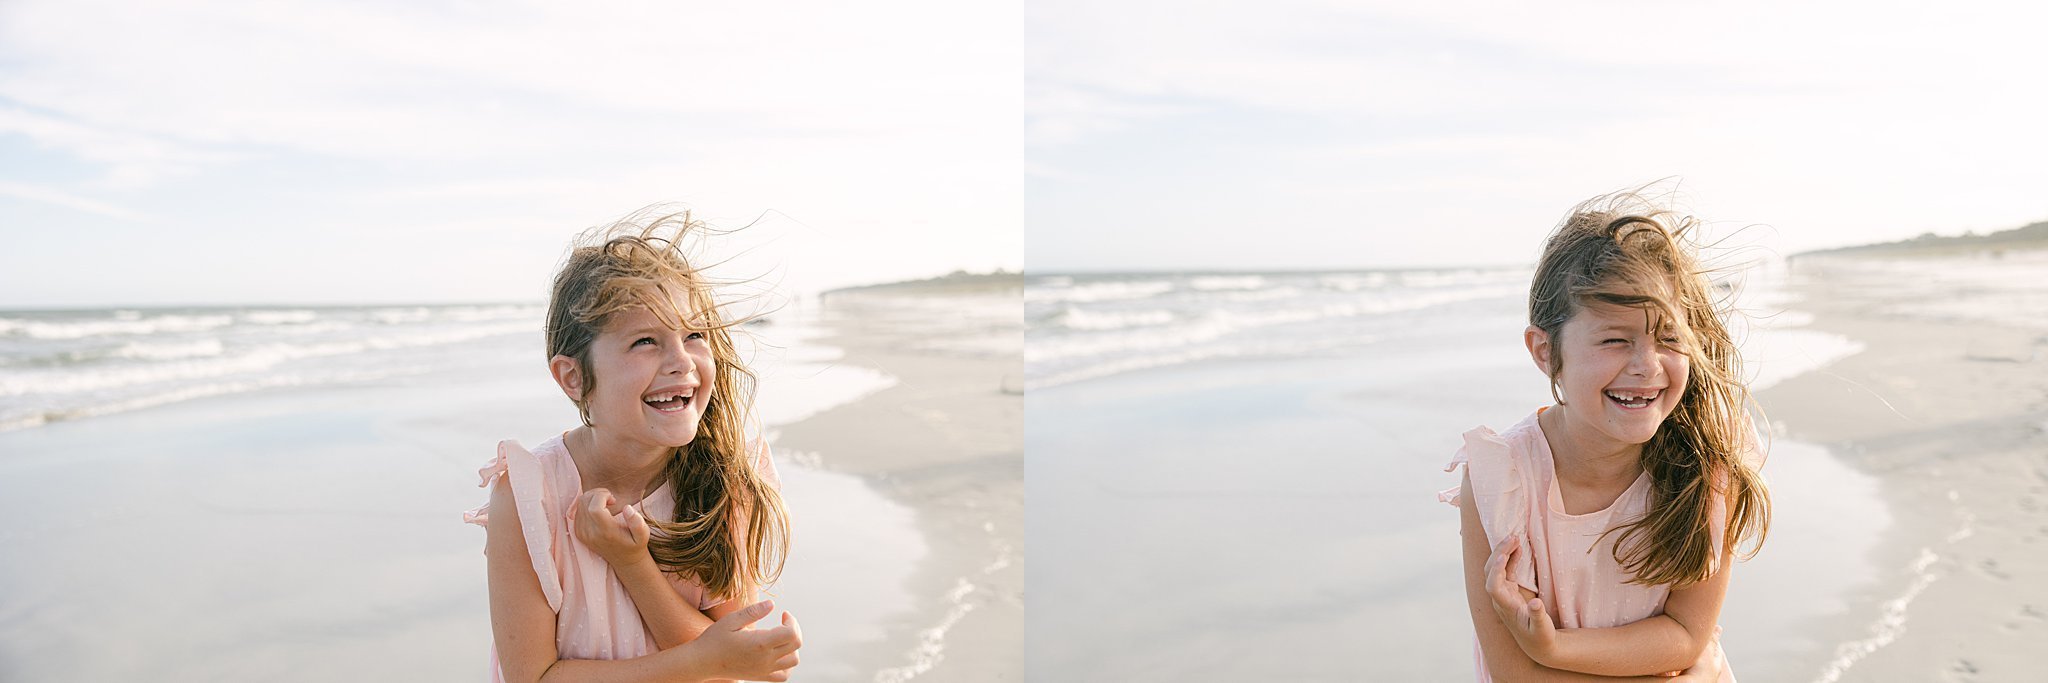 Katherine_Ives_Photography_Early_Hilton_Head_Extended_Family_Session_133.JPG